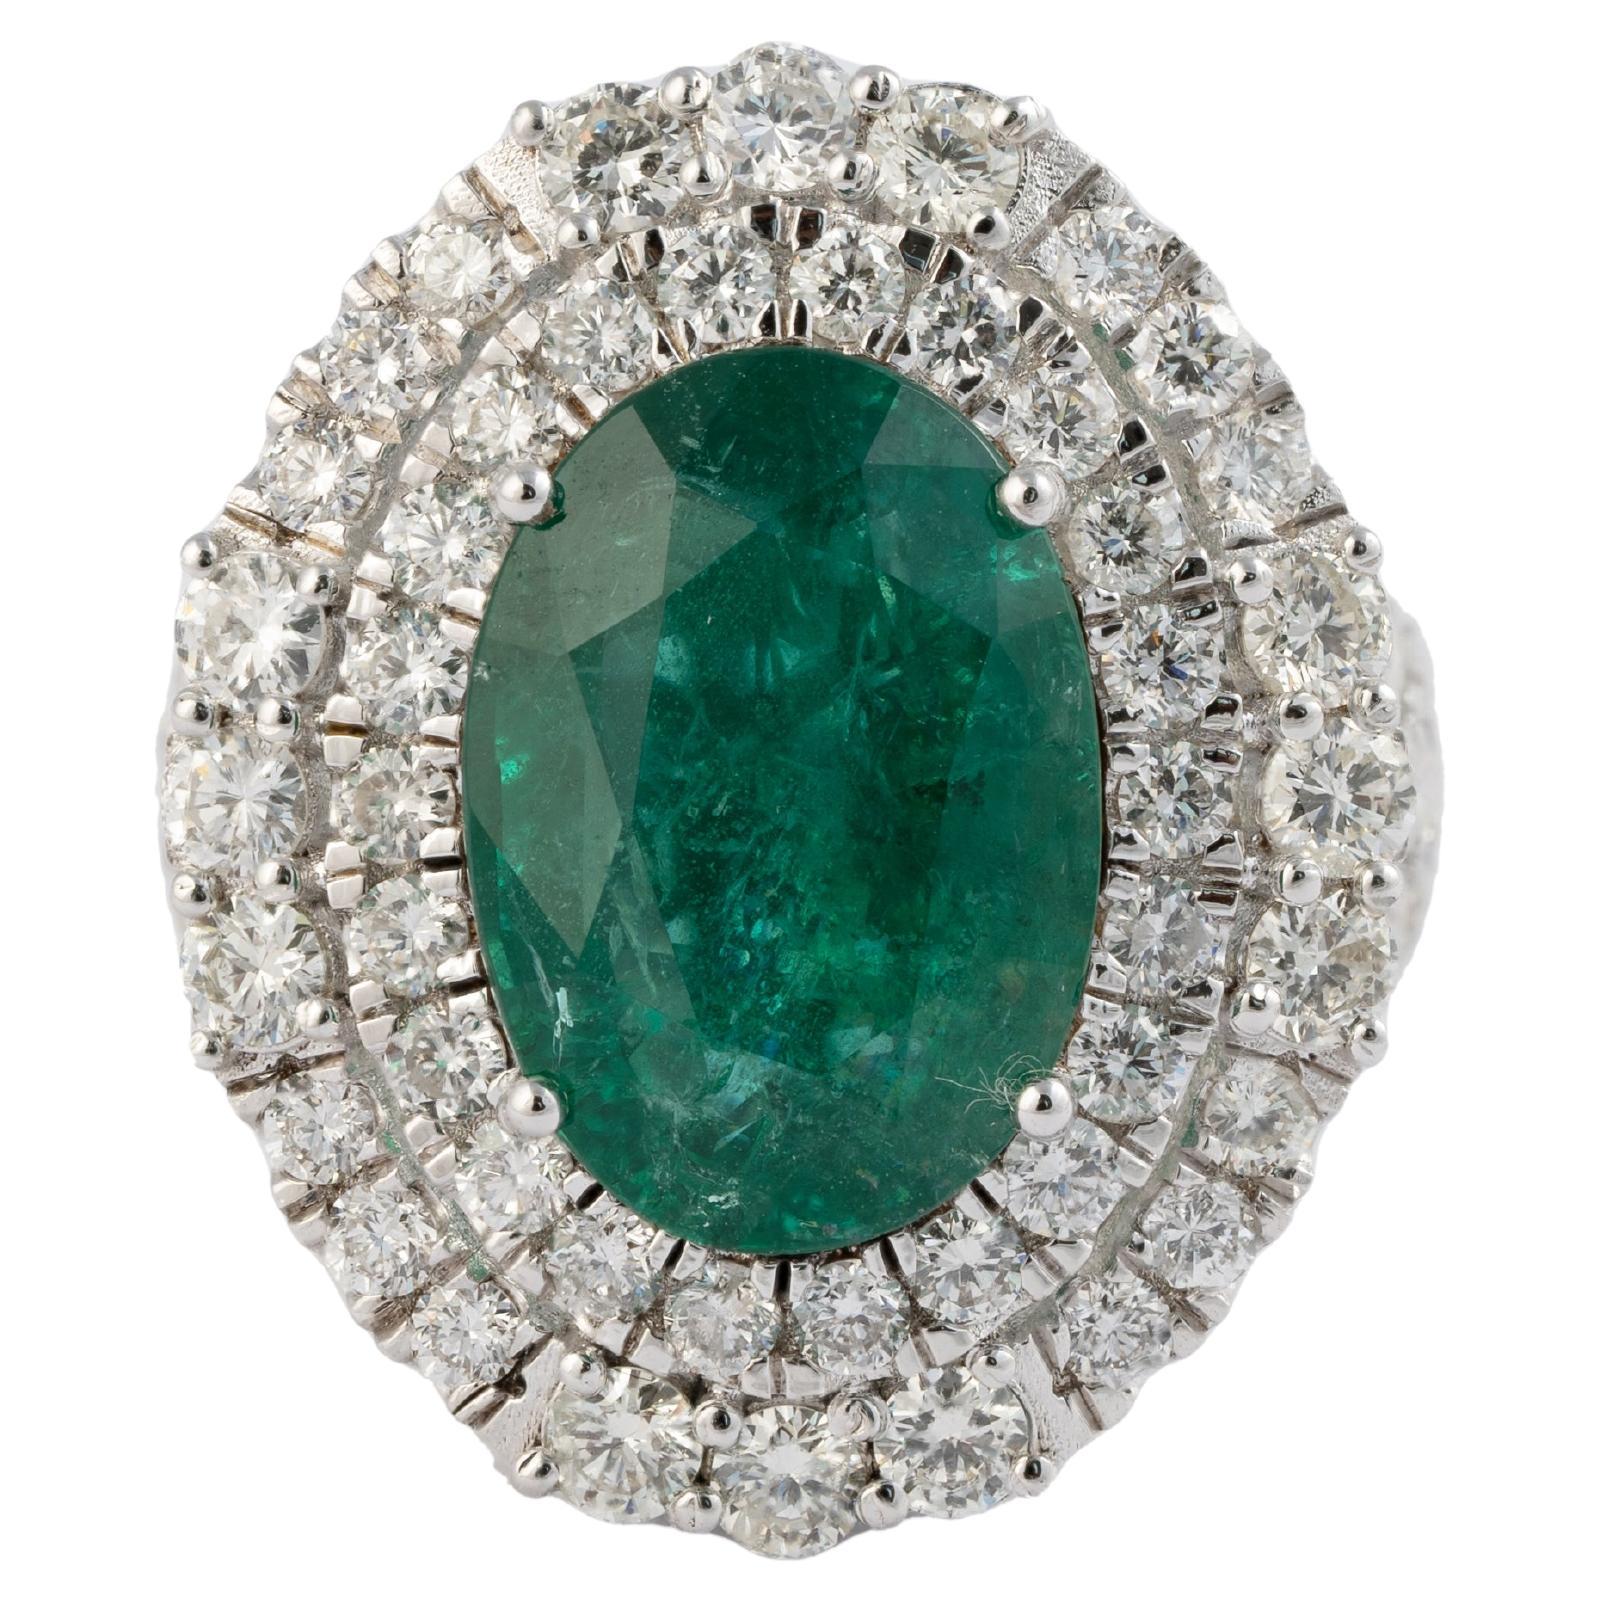 this is a stunning natural Zambian Emerald  ring with very high quality Emerald and very good quality diamonds ( vsi ) and G colour

emeralds : 5.97cts
diamonds: 2.74cts
gold :7.048gms
